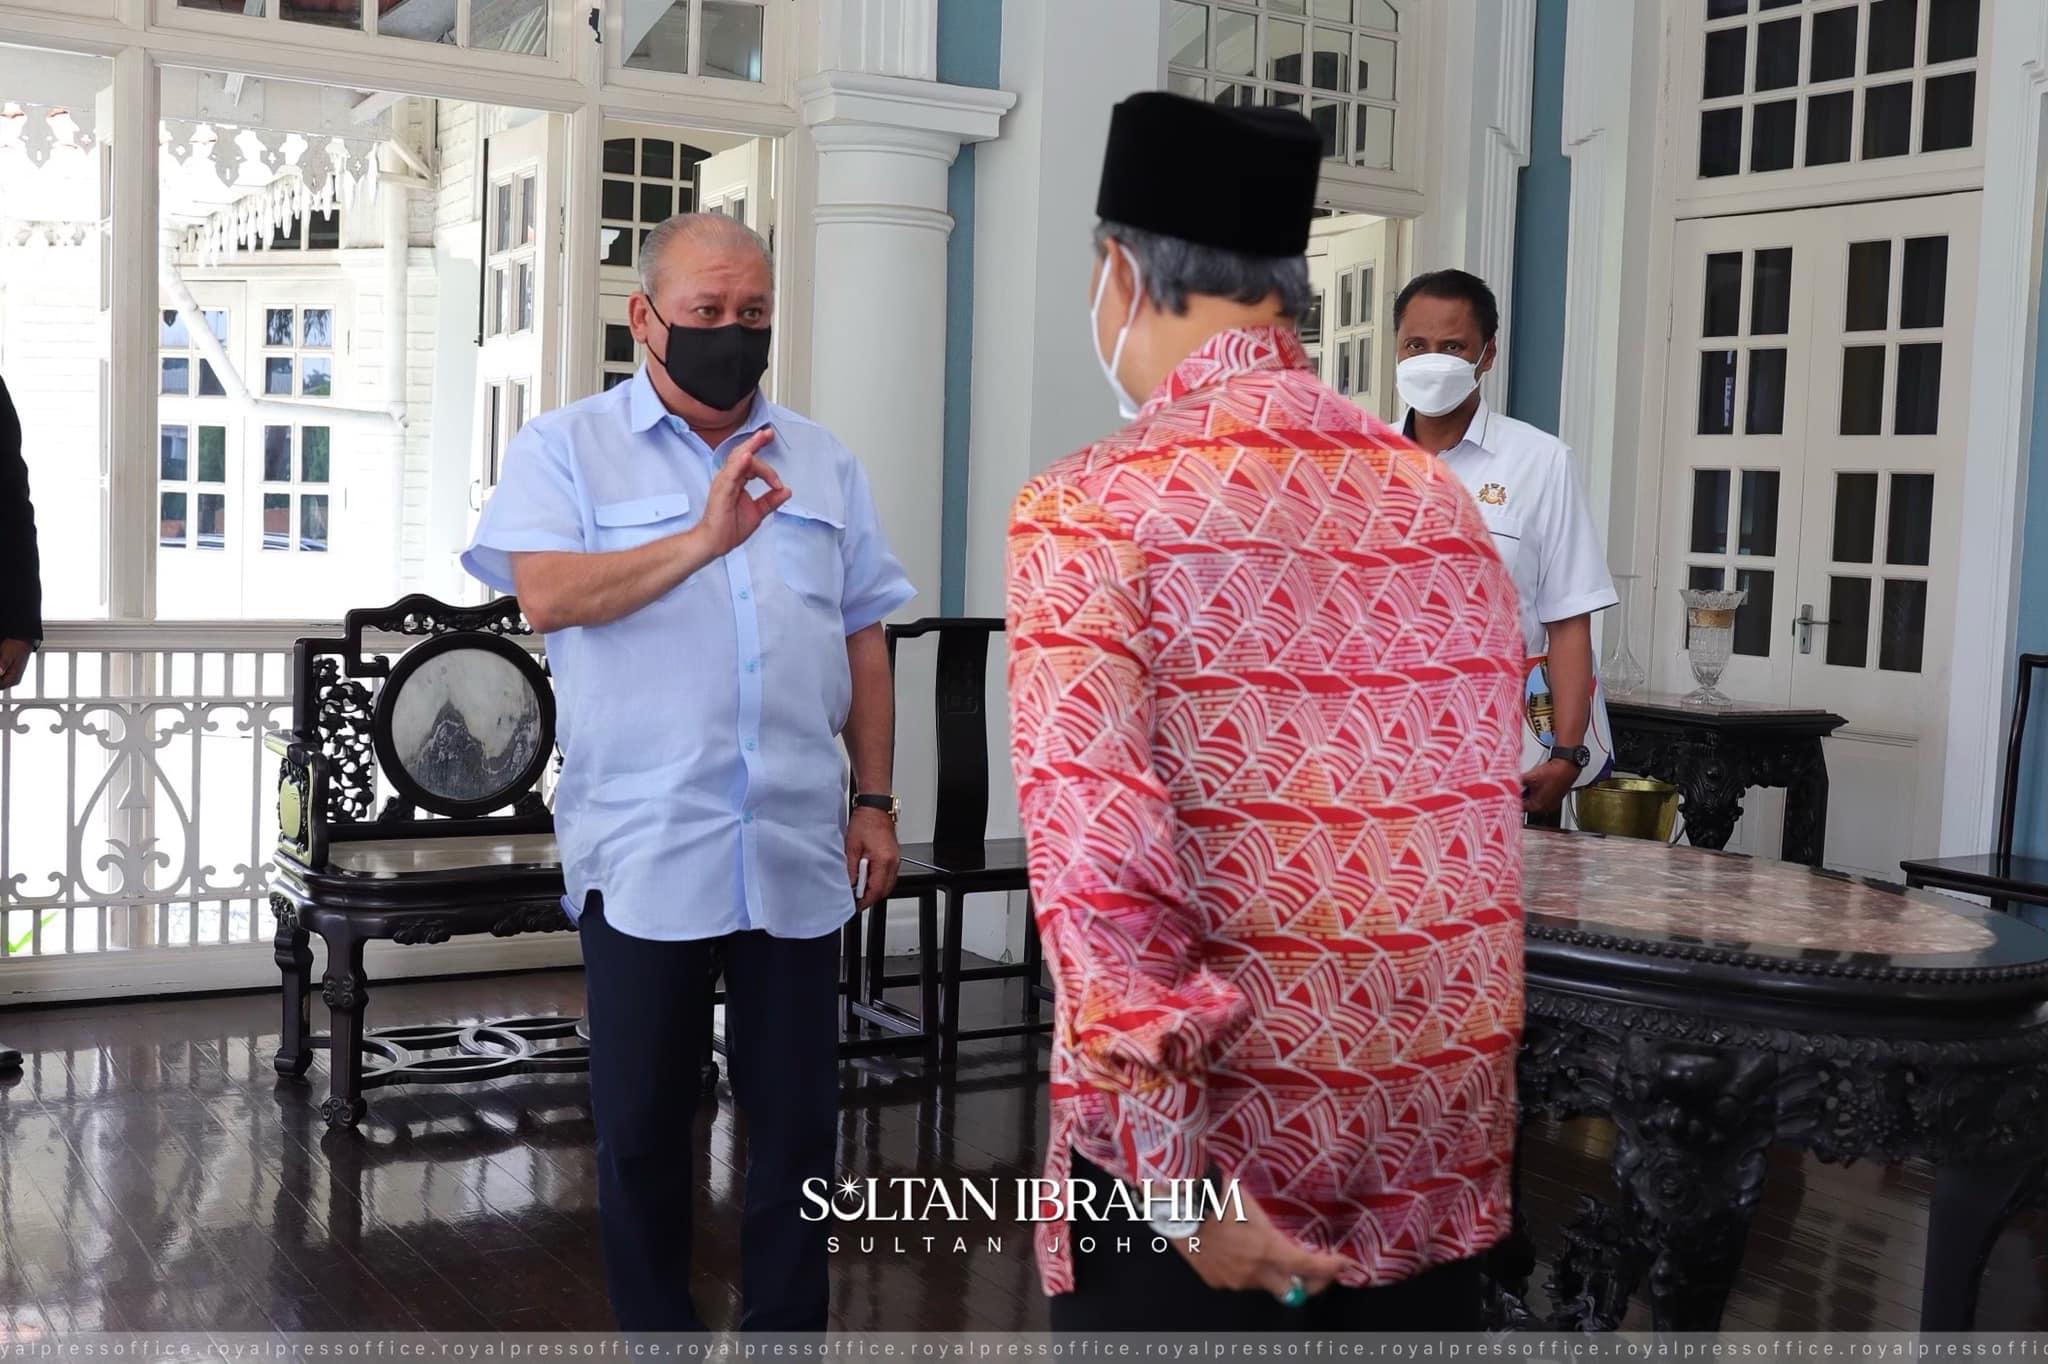 Johor ruler Sultan Ibrahim Sultan Iskandar greets Prime Minister Muhyiddin Yassin at the state palace today. Photo: Johor Royal Press Office Facebook